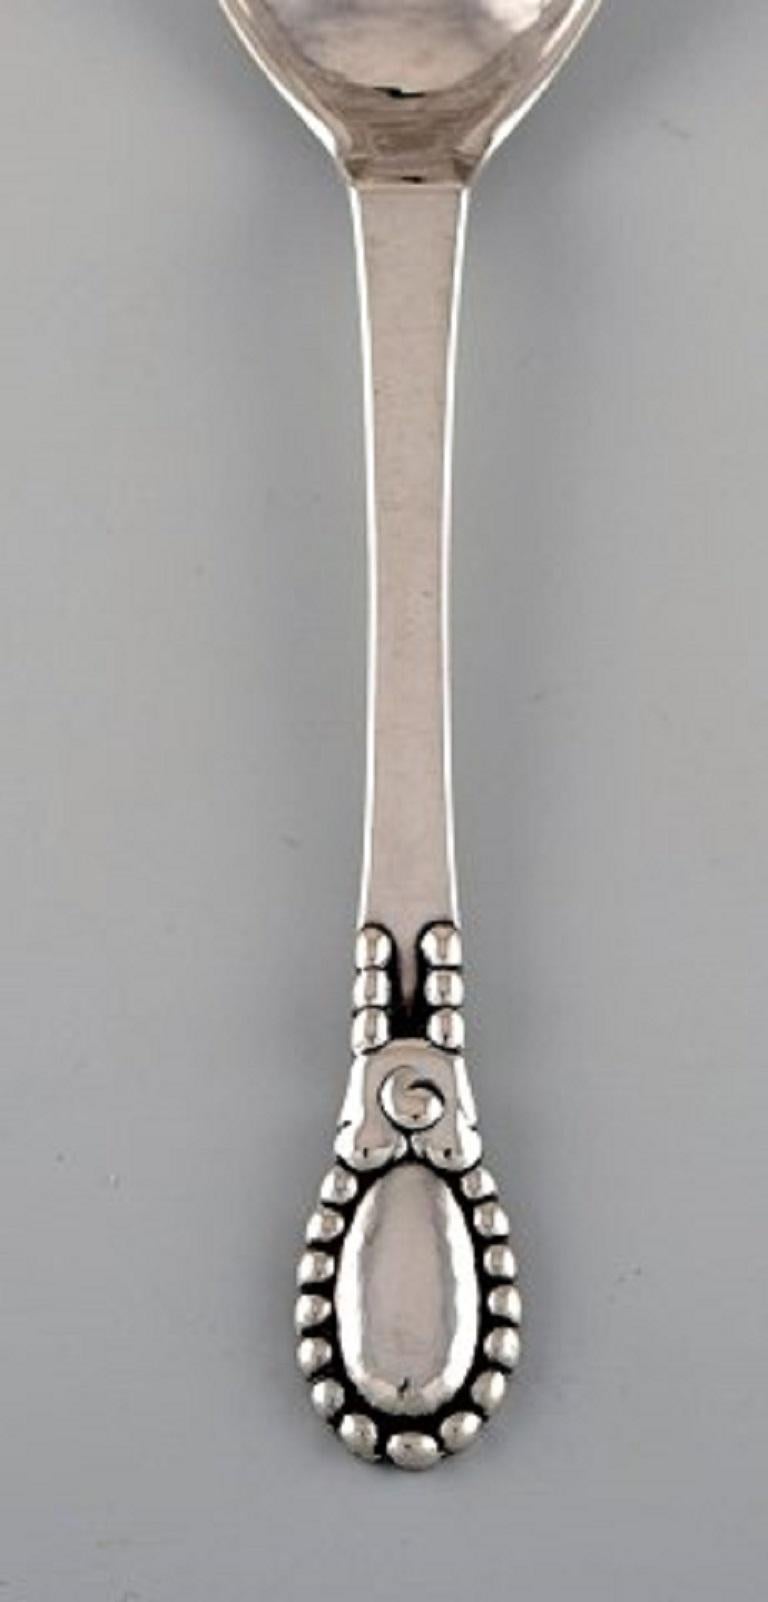 Evald Nielsen number 13 jam spoon in hammered silver, 830. Dated 1924.
Size: Length 14 cm.
Stamped.
In excellent condition.
Our skilled Georg Jensen silversmith / jeweler can polish all silver and gold so that it looks like new. The price is